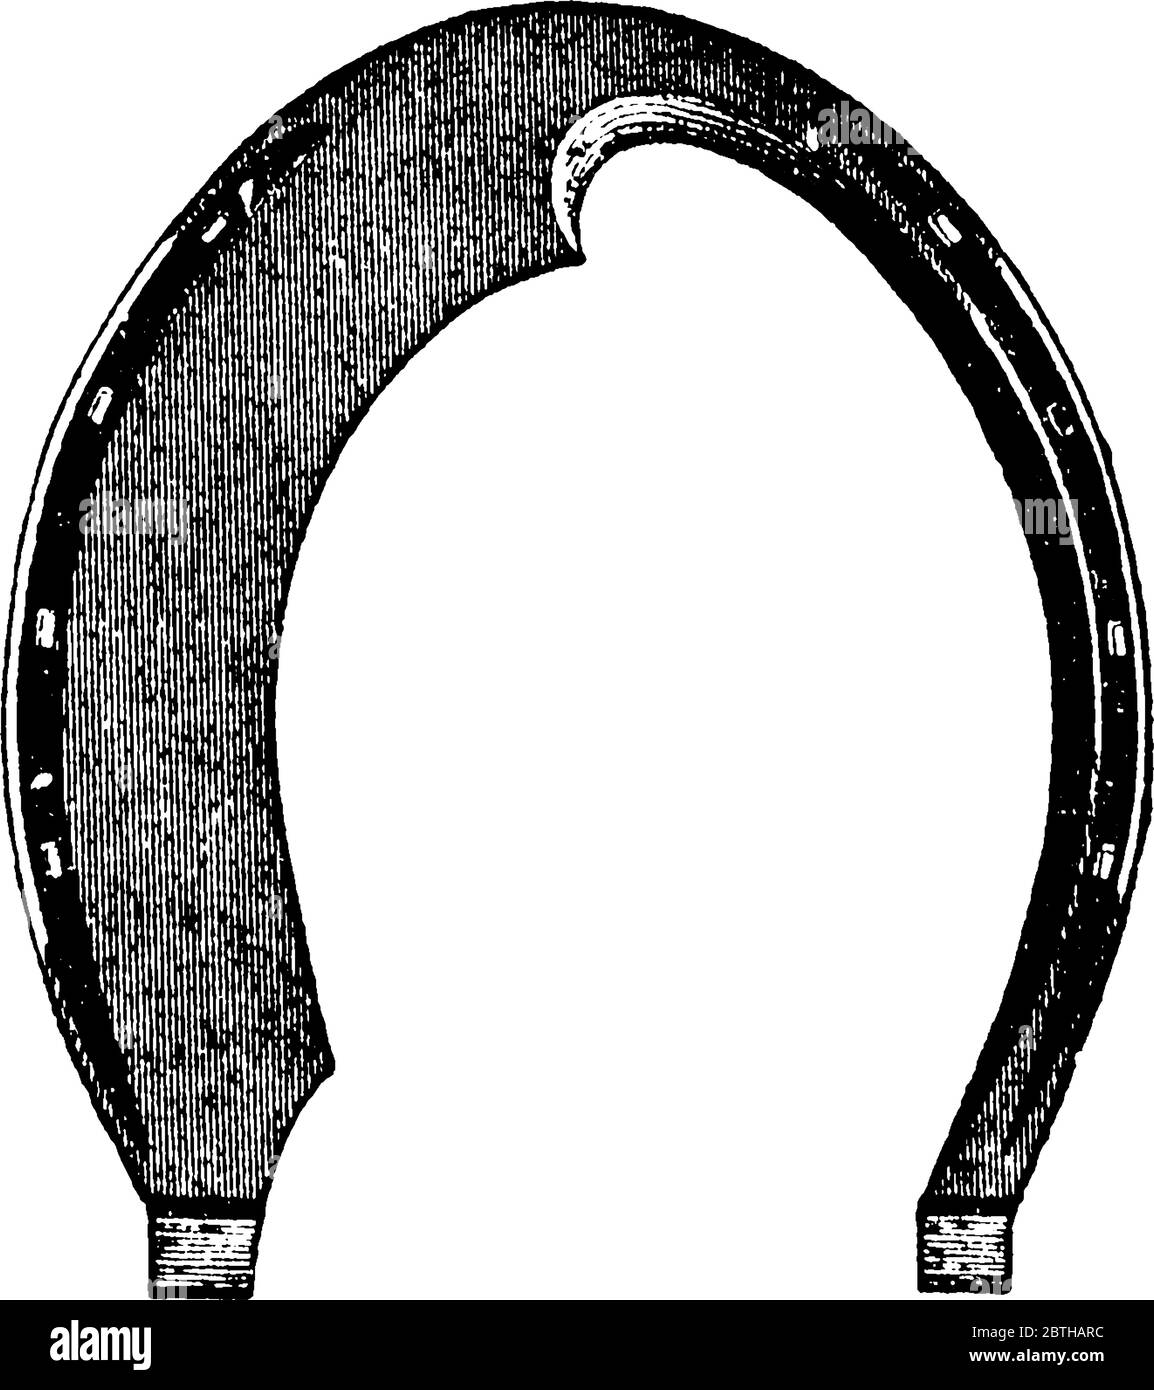 Horseshoe is a u-shaped metal plate by which horses’ hooves are protected., vintage line drawing or engraving illustration. Stock Vector